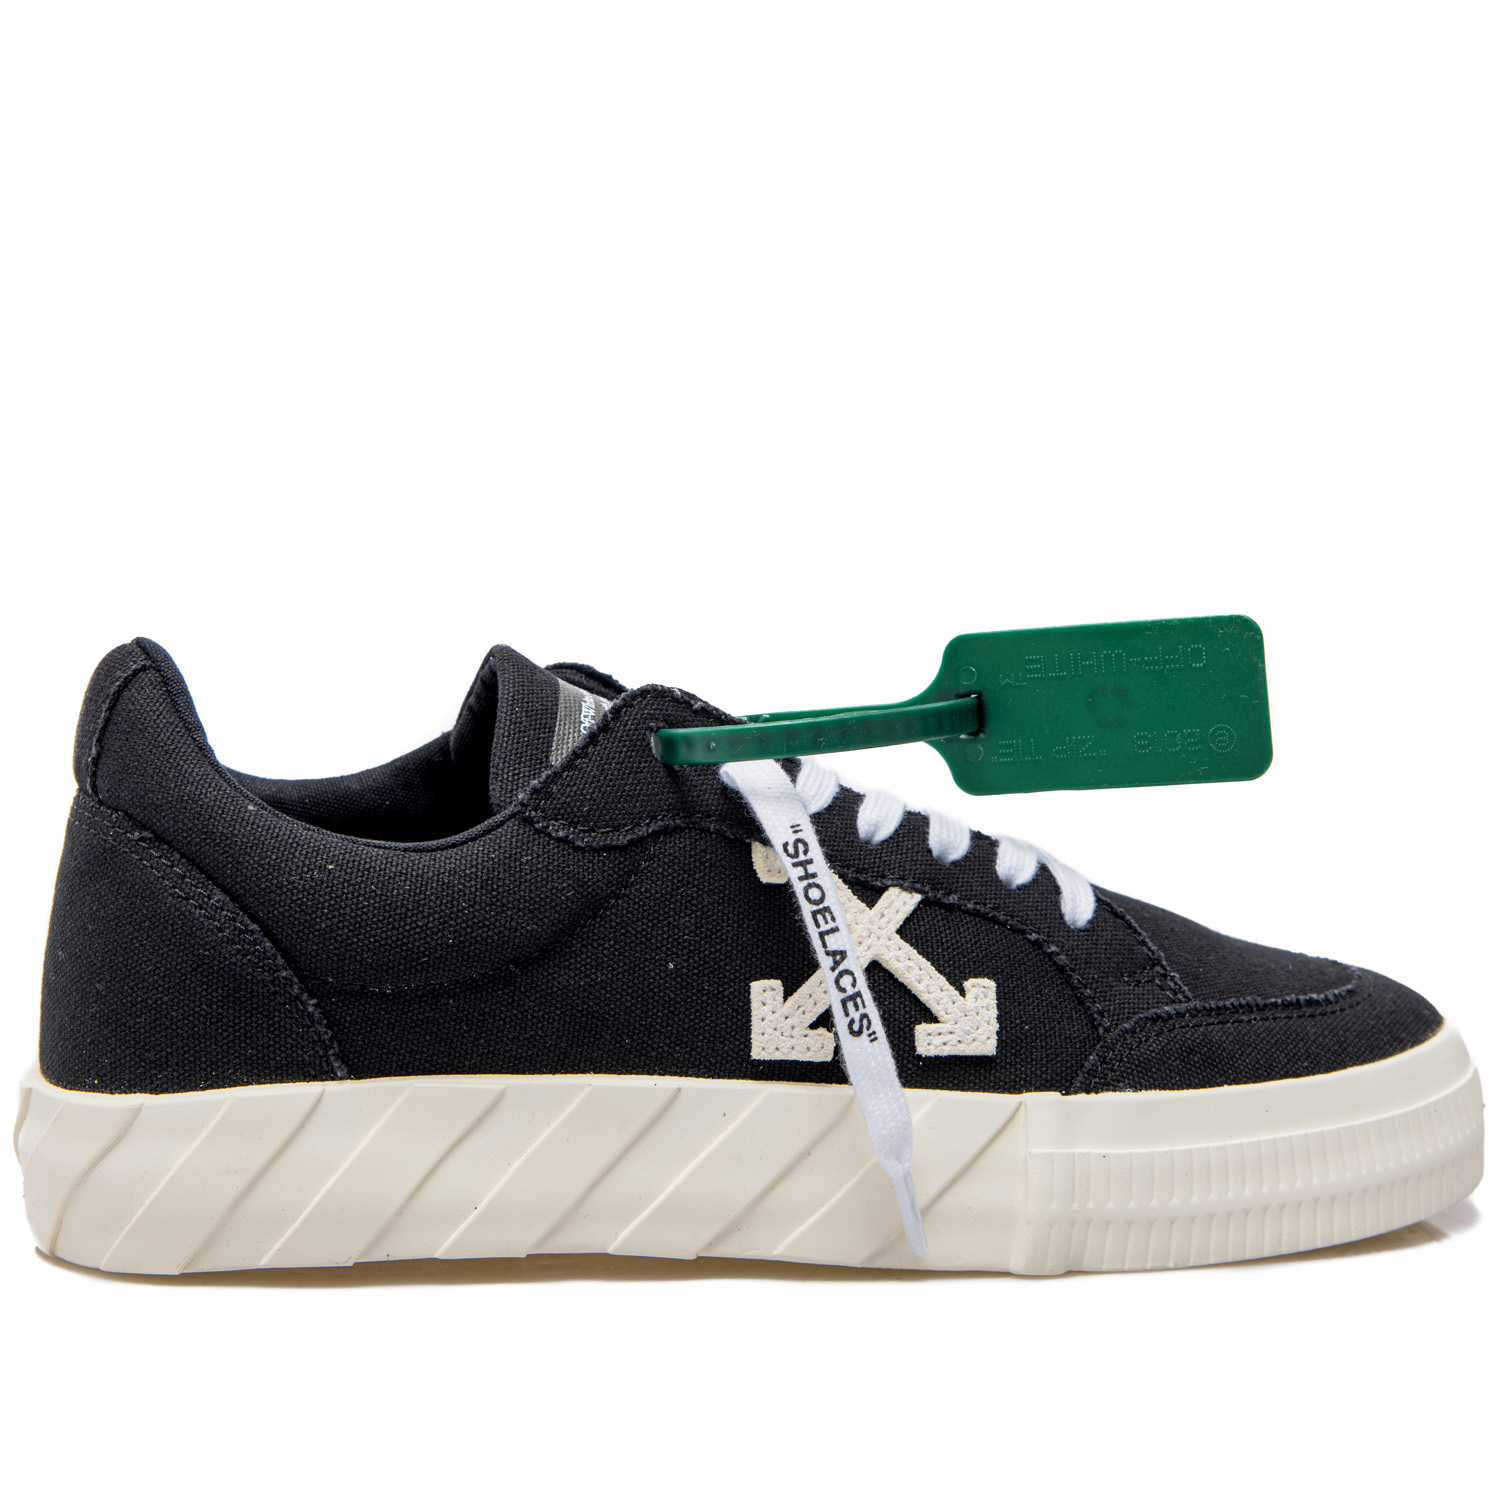 Off-White Off White Low Vulcanized Canvas Sneakers Black/white